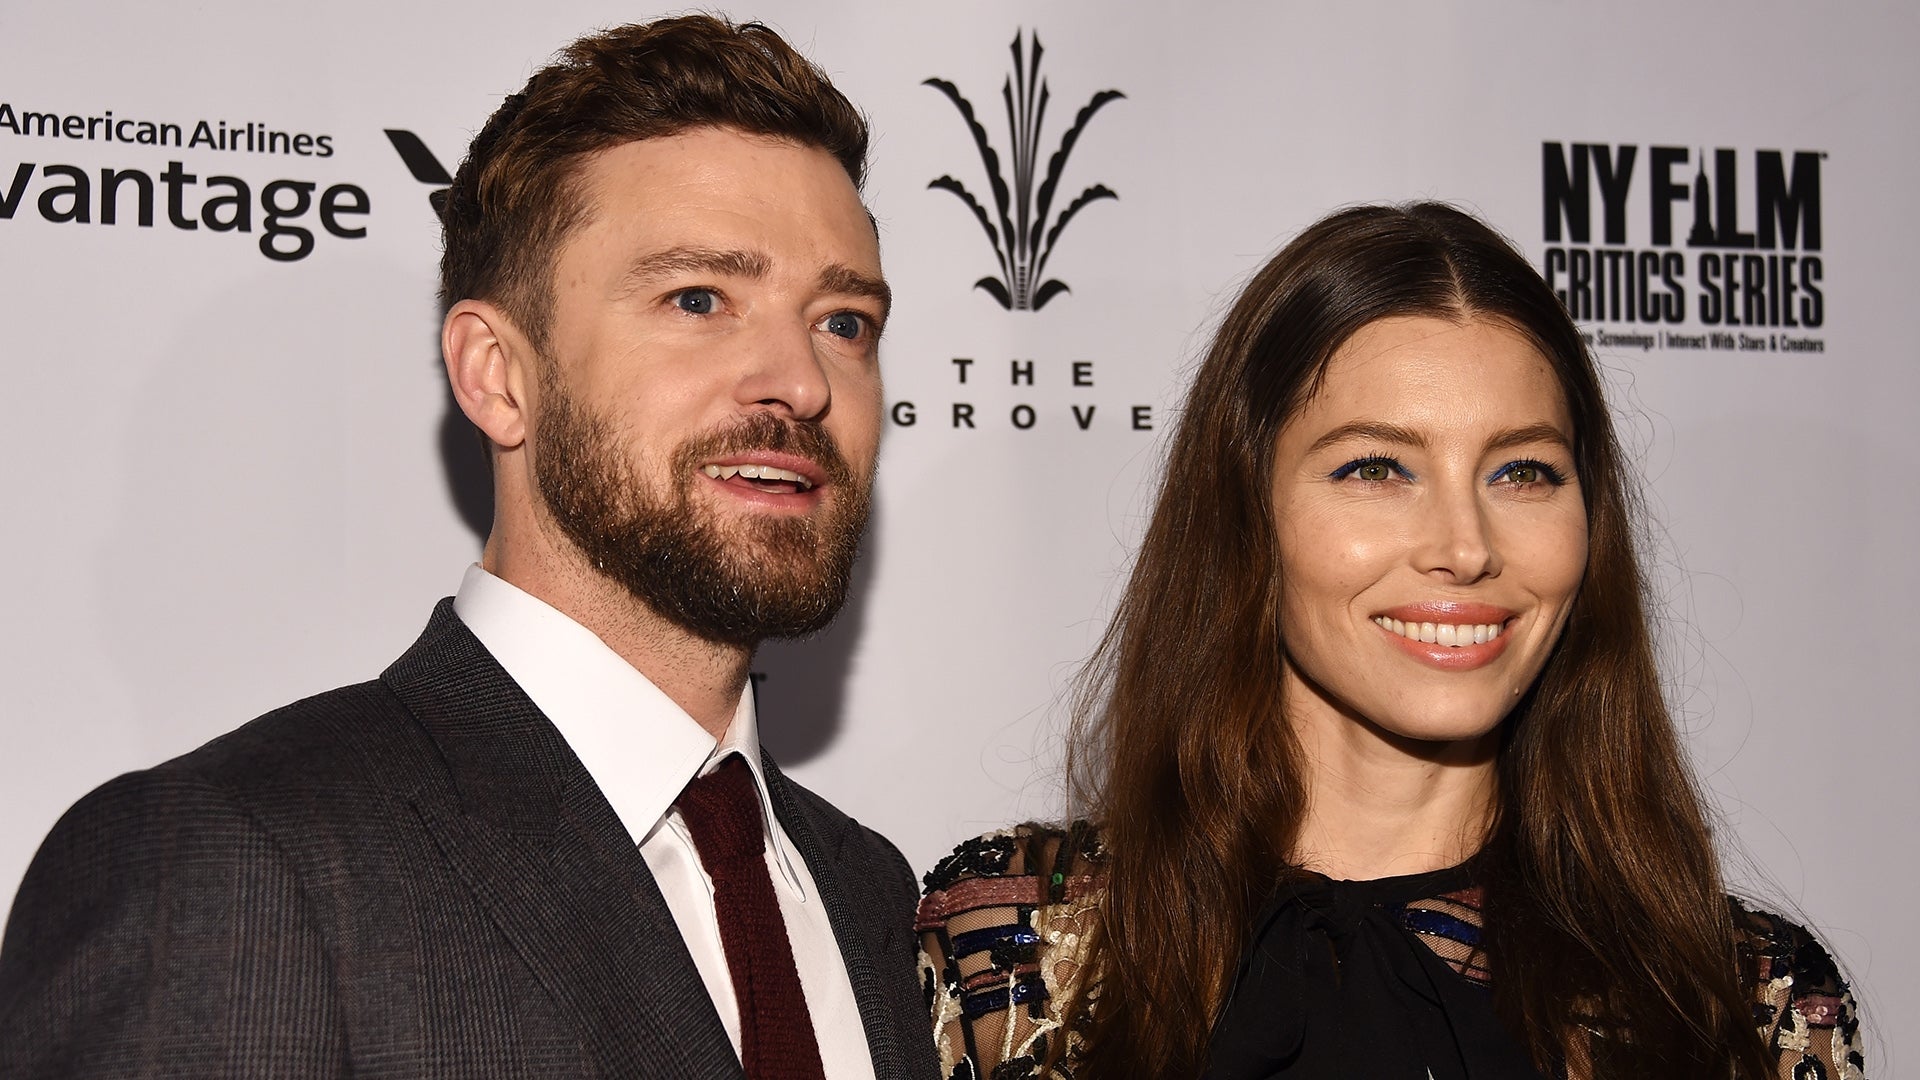 Jessica Biel Opens Up About Having a 'Secret COVID Baby